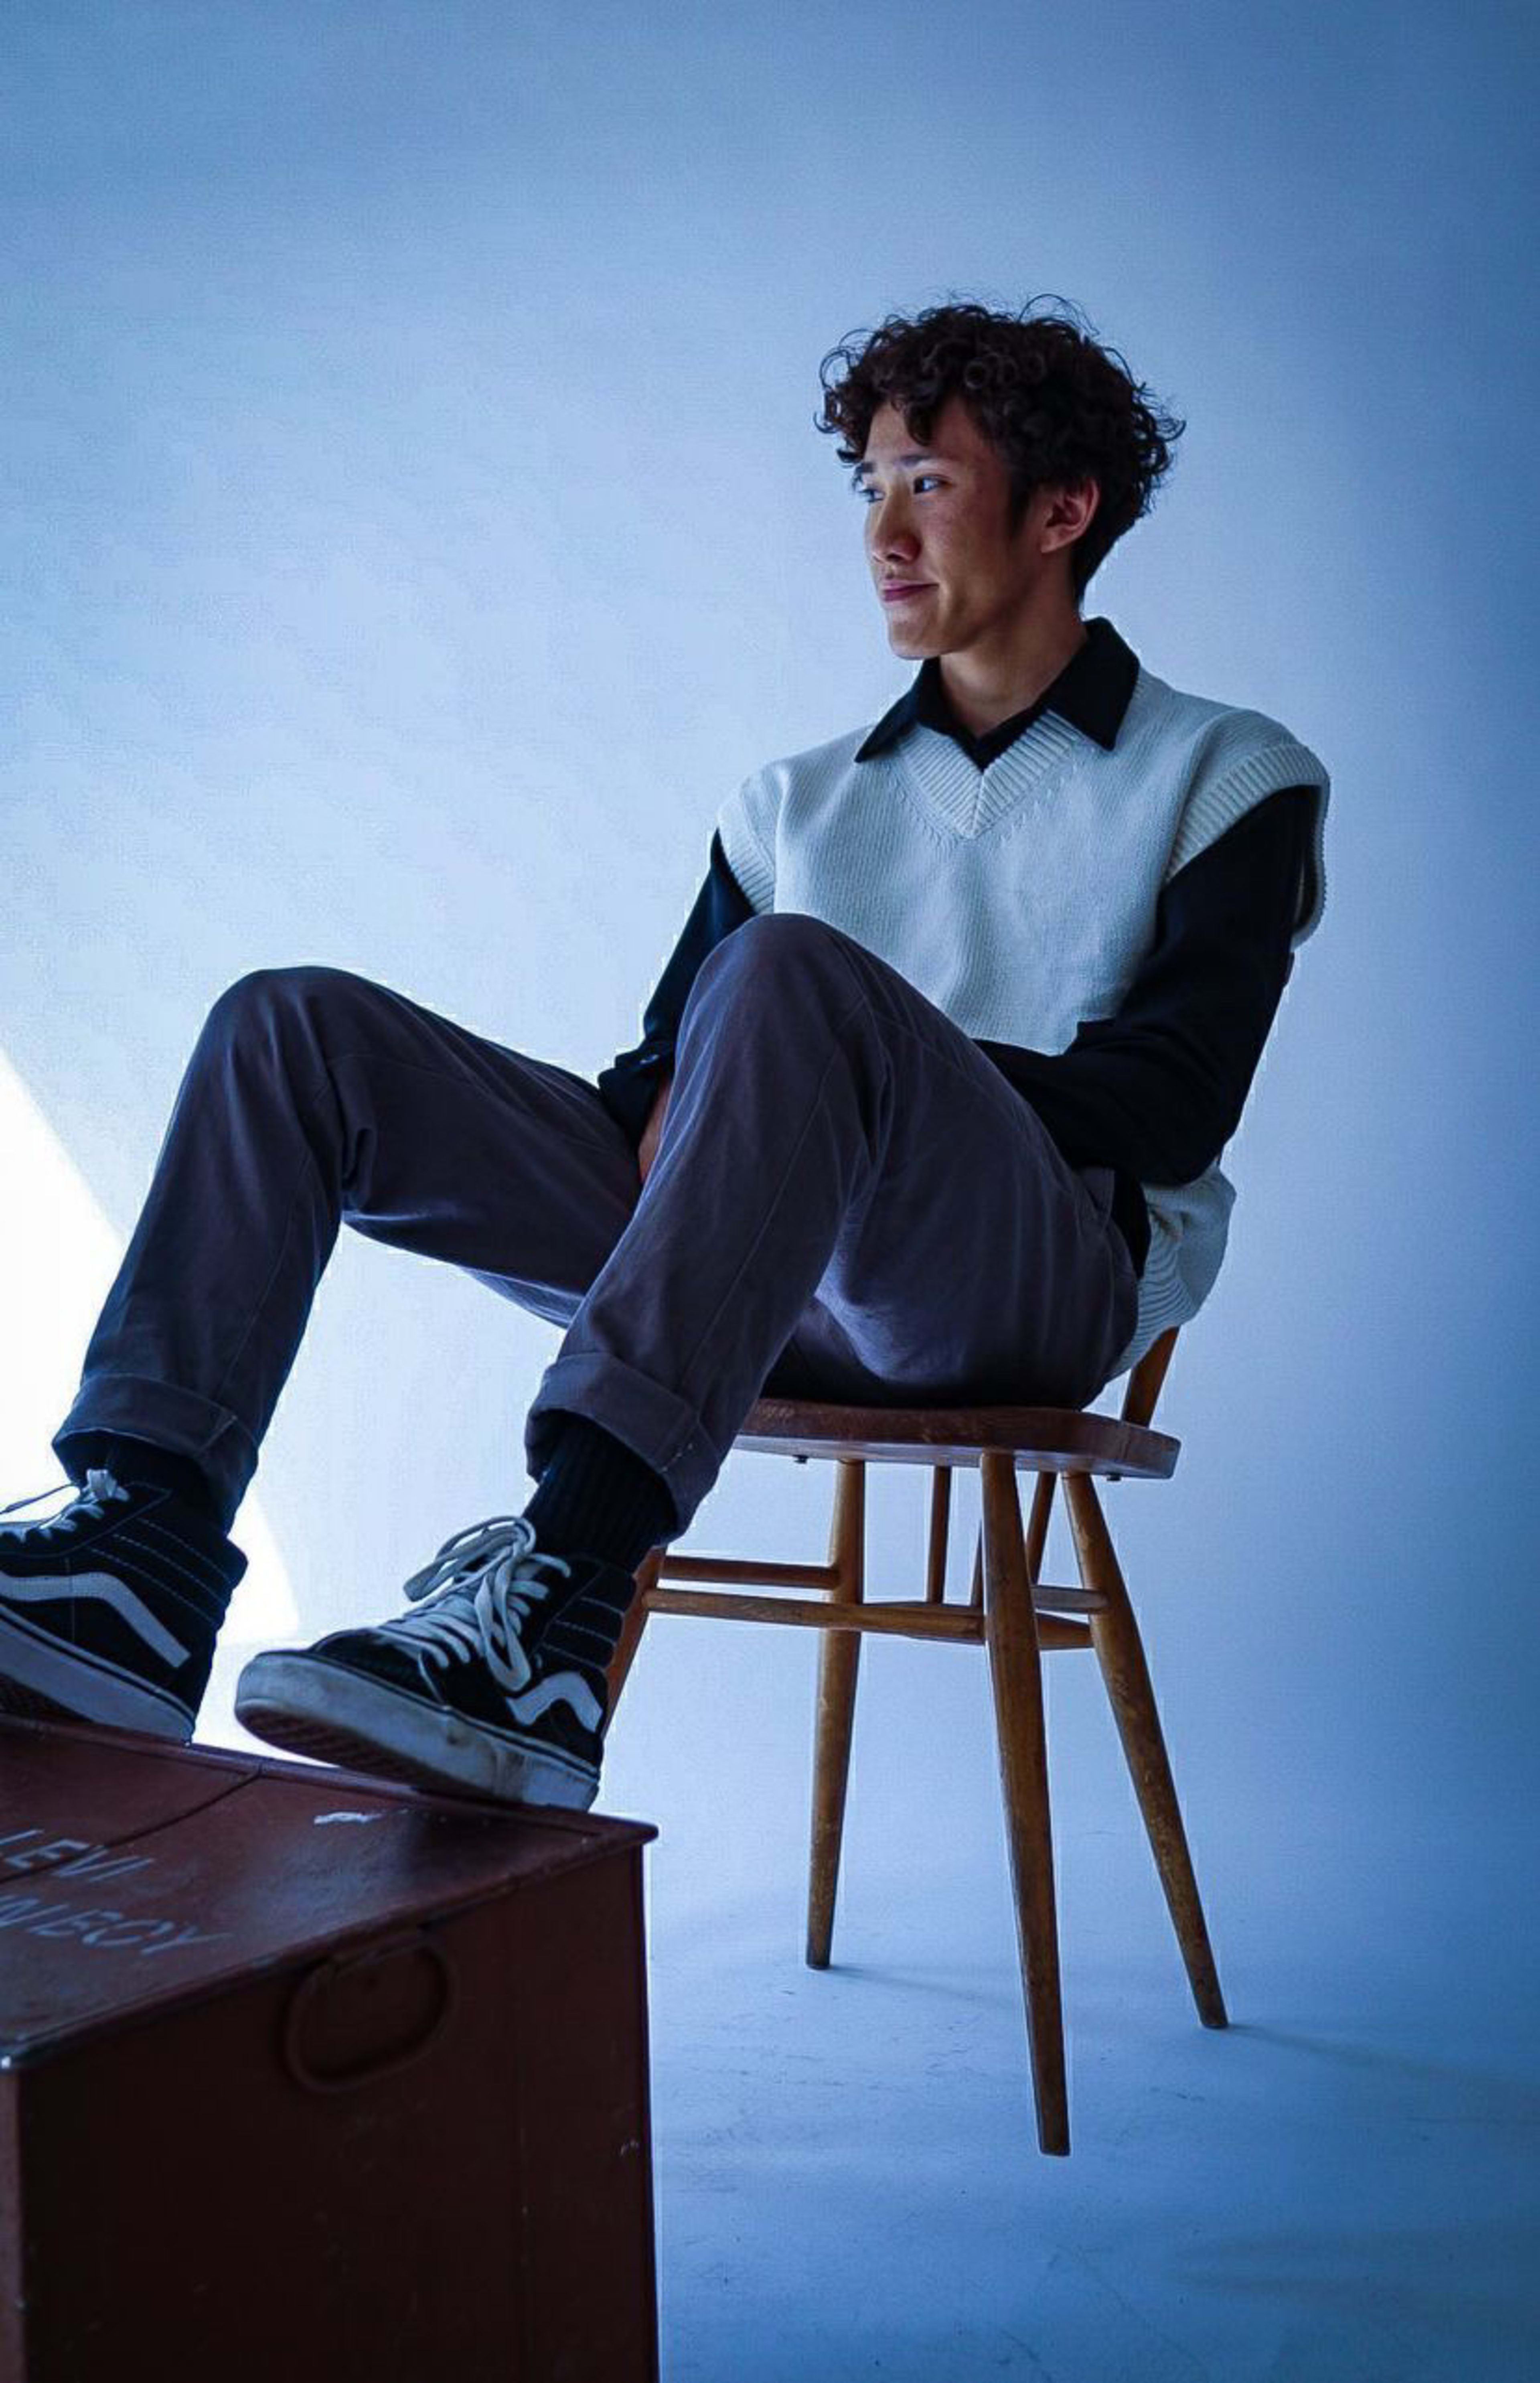 A man in blue sitting in a chair with his feet on a black suitcase during a photo shoot.